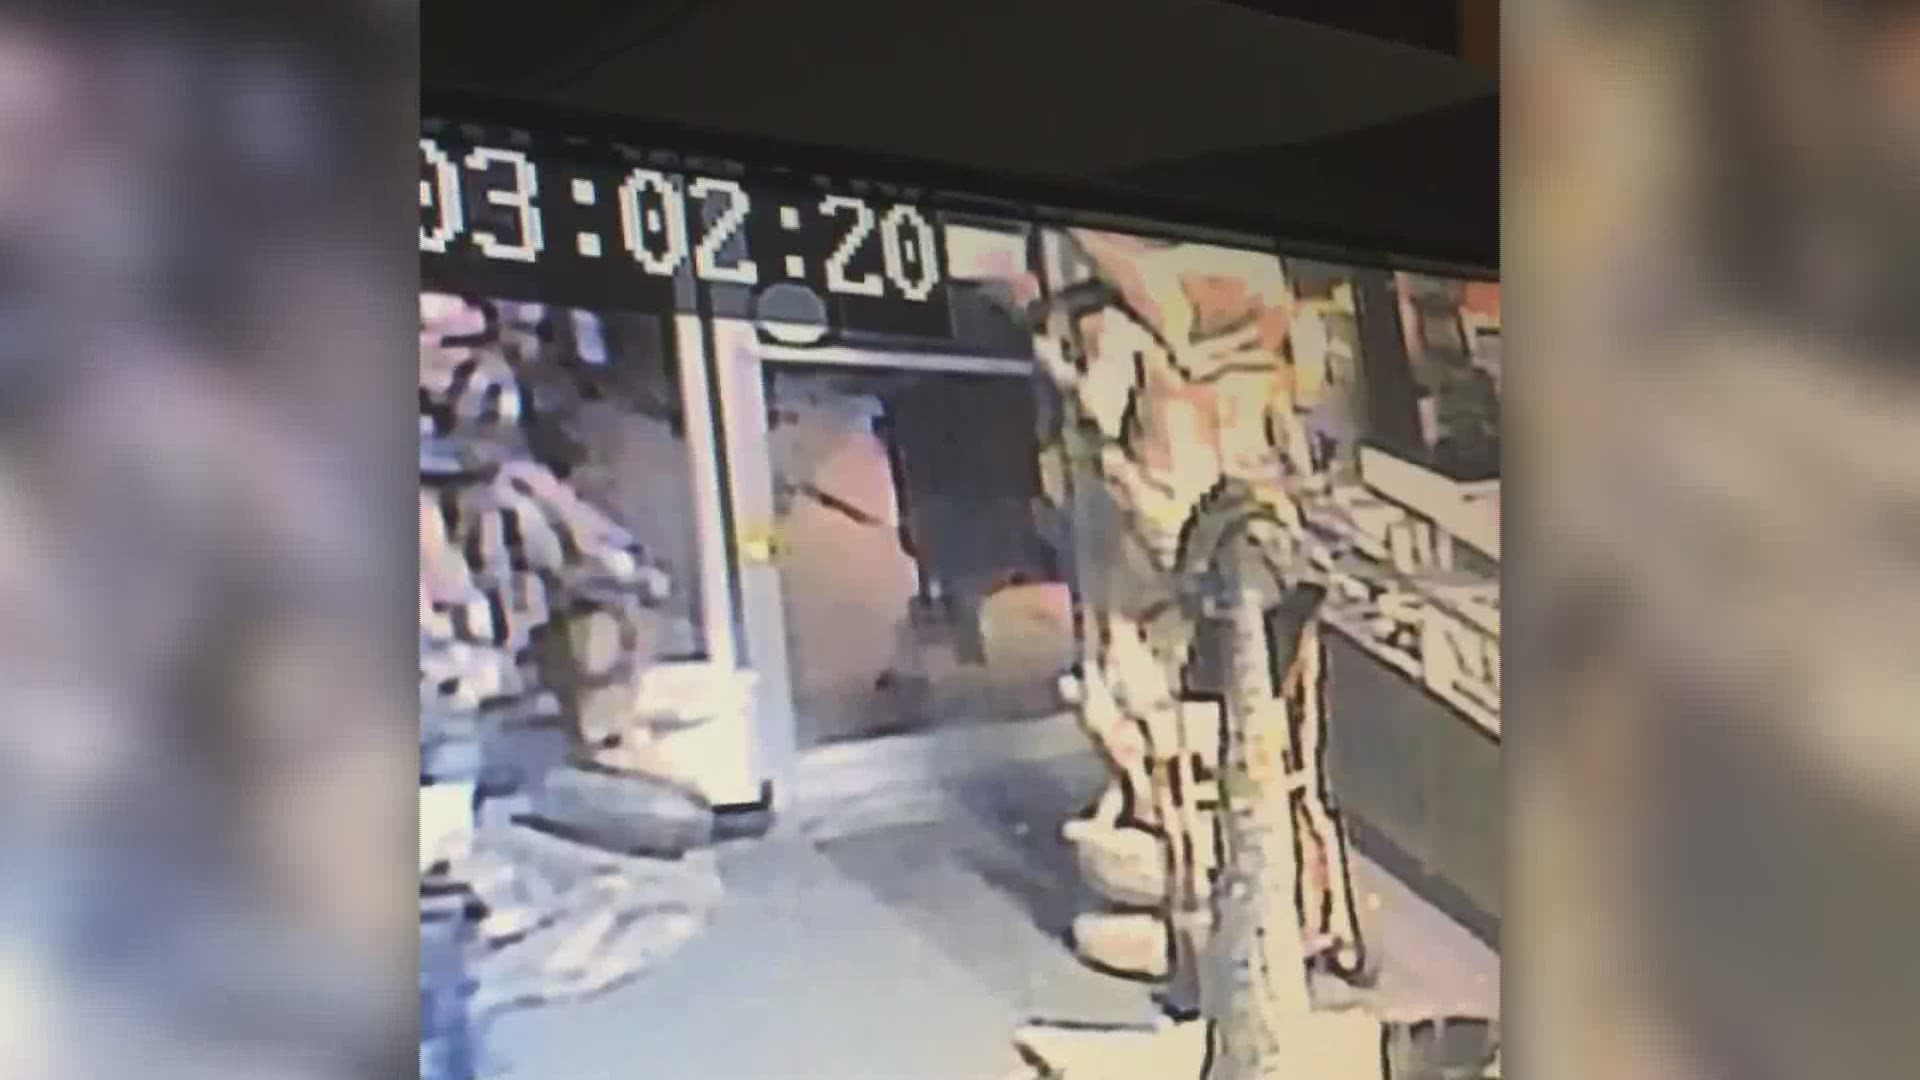 One person broke into the shop overnight last week and stole jewelry.